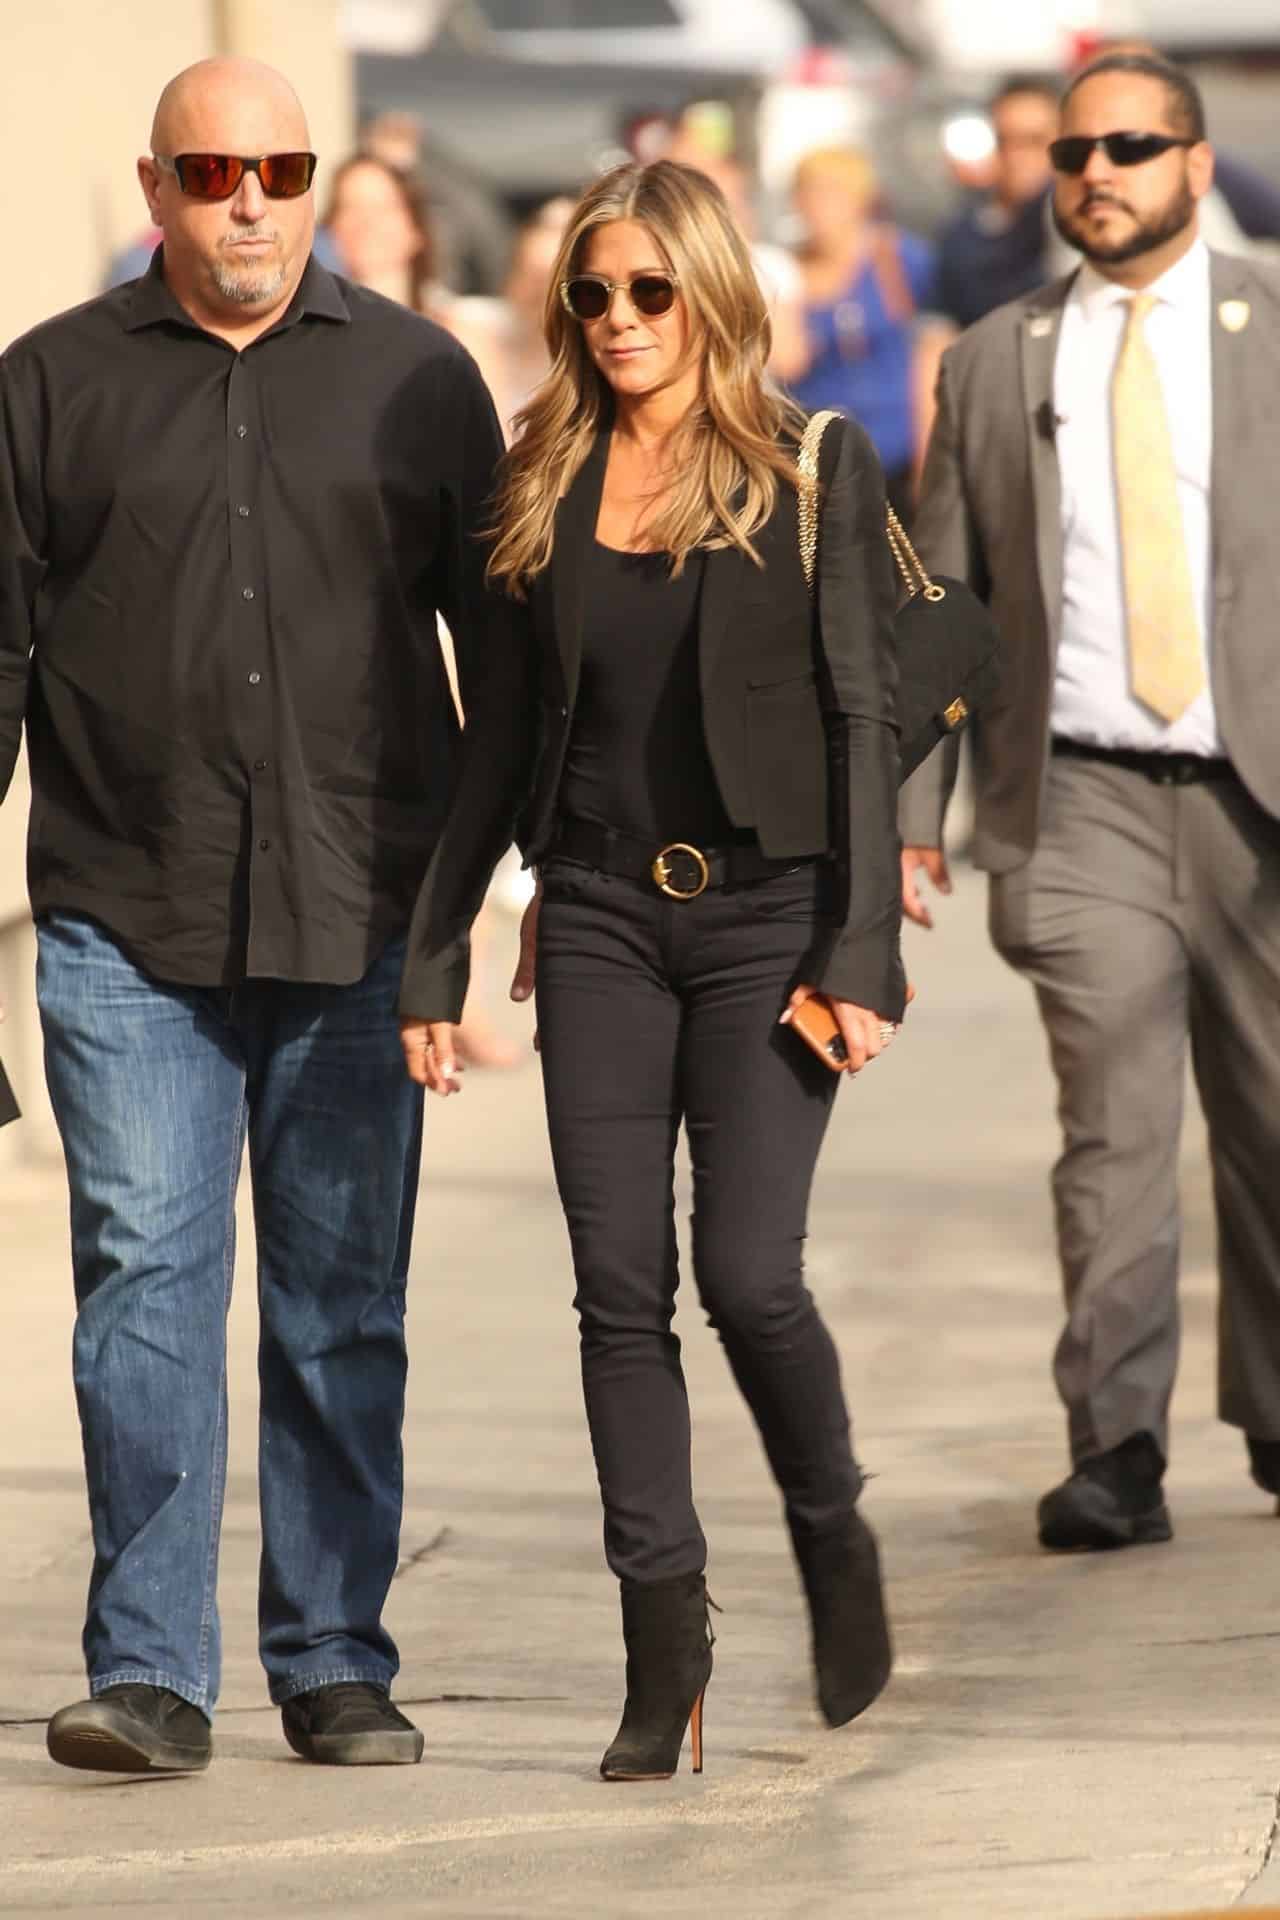 Jennifer Aniston Models a Business-Chic Look for Jimmy Kimmel Live